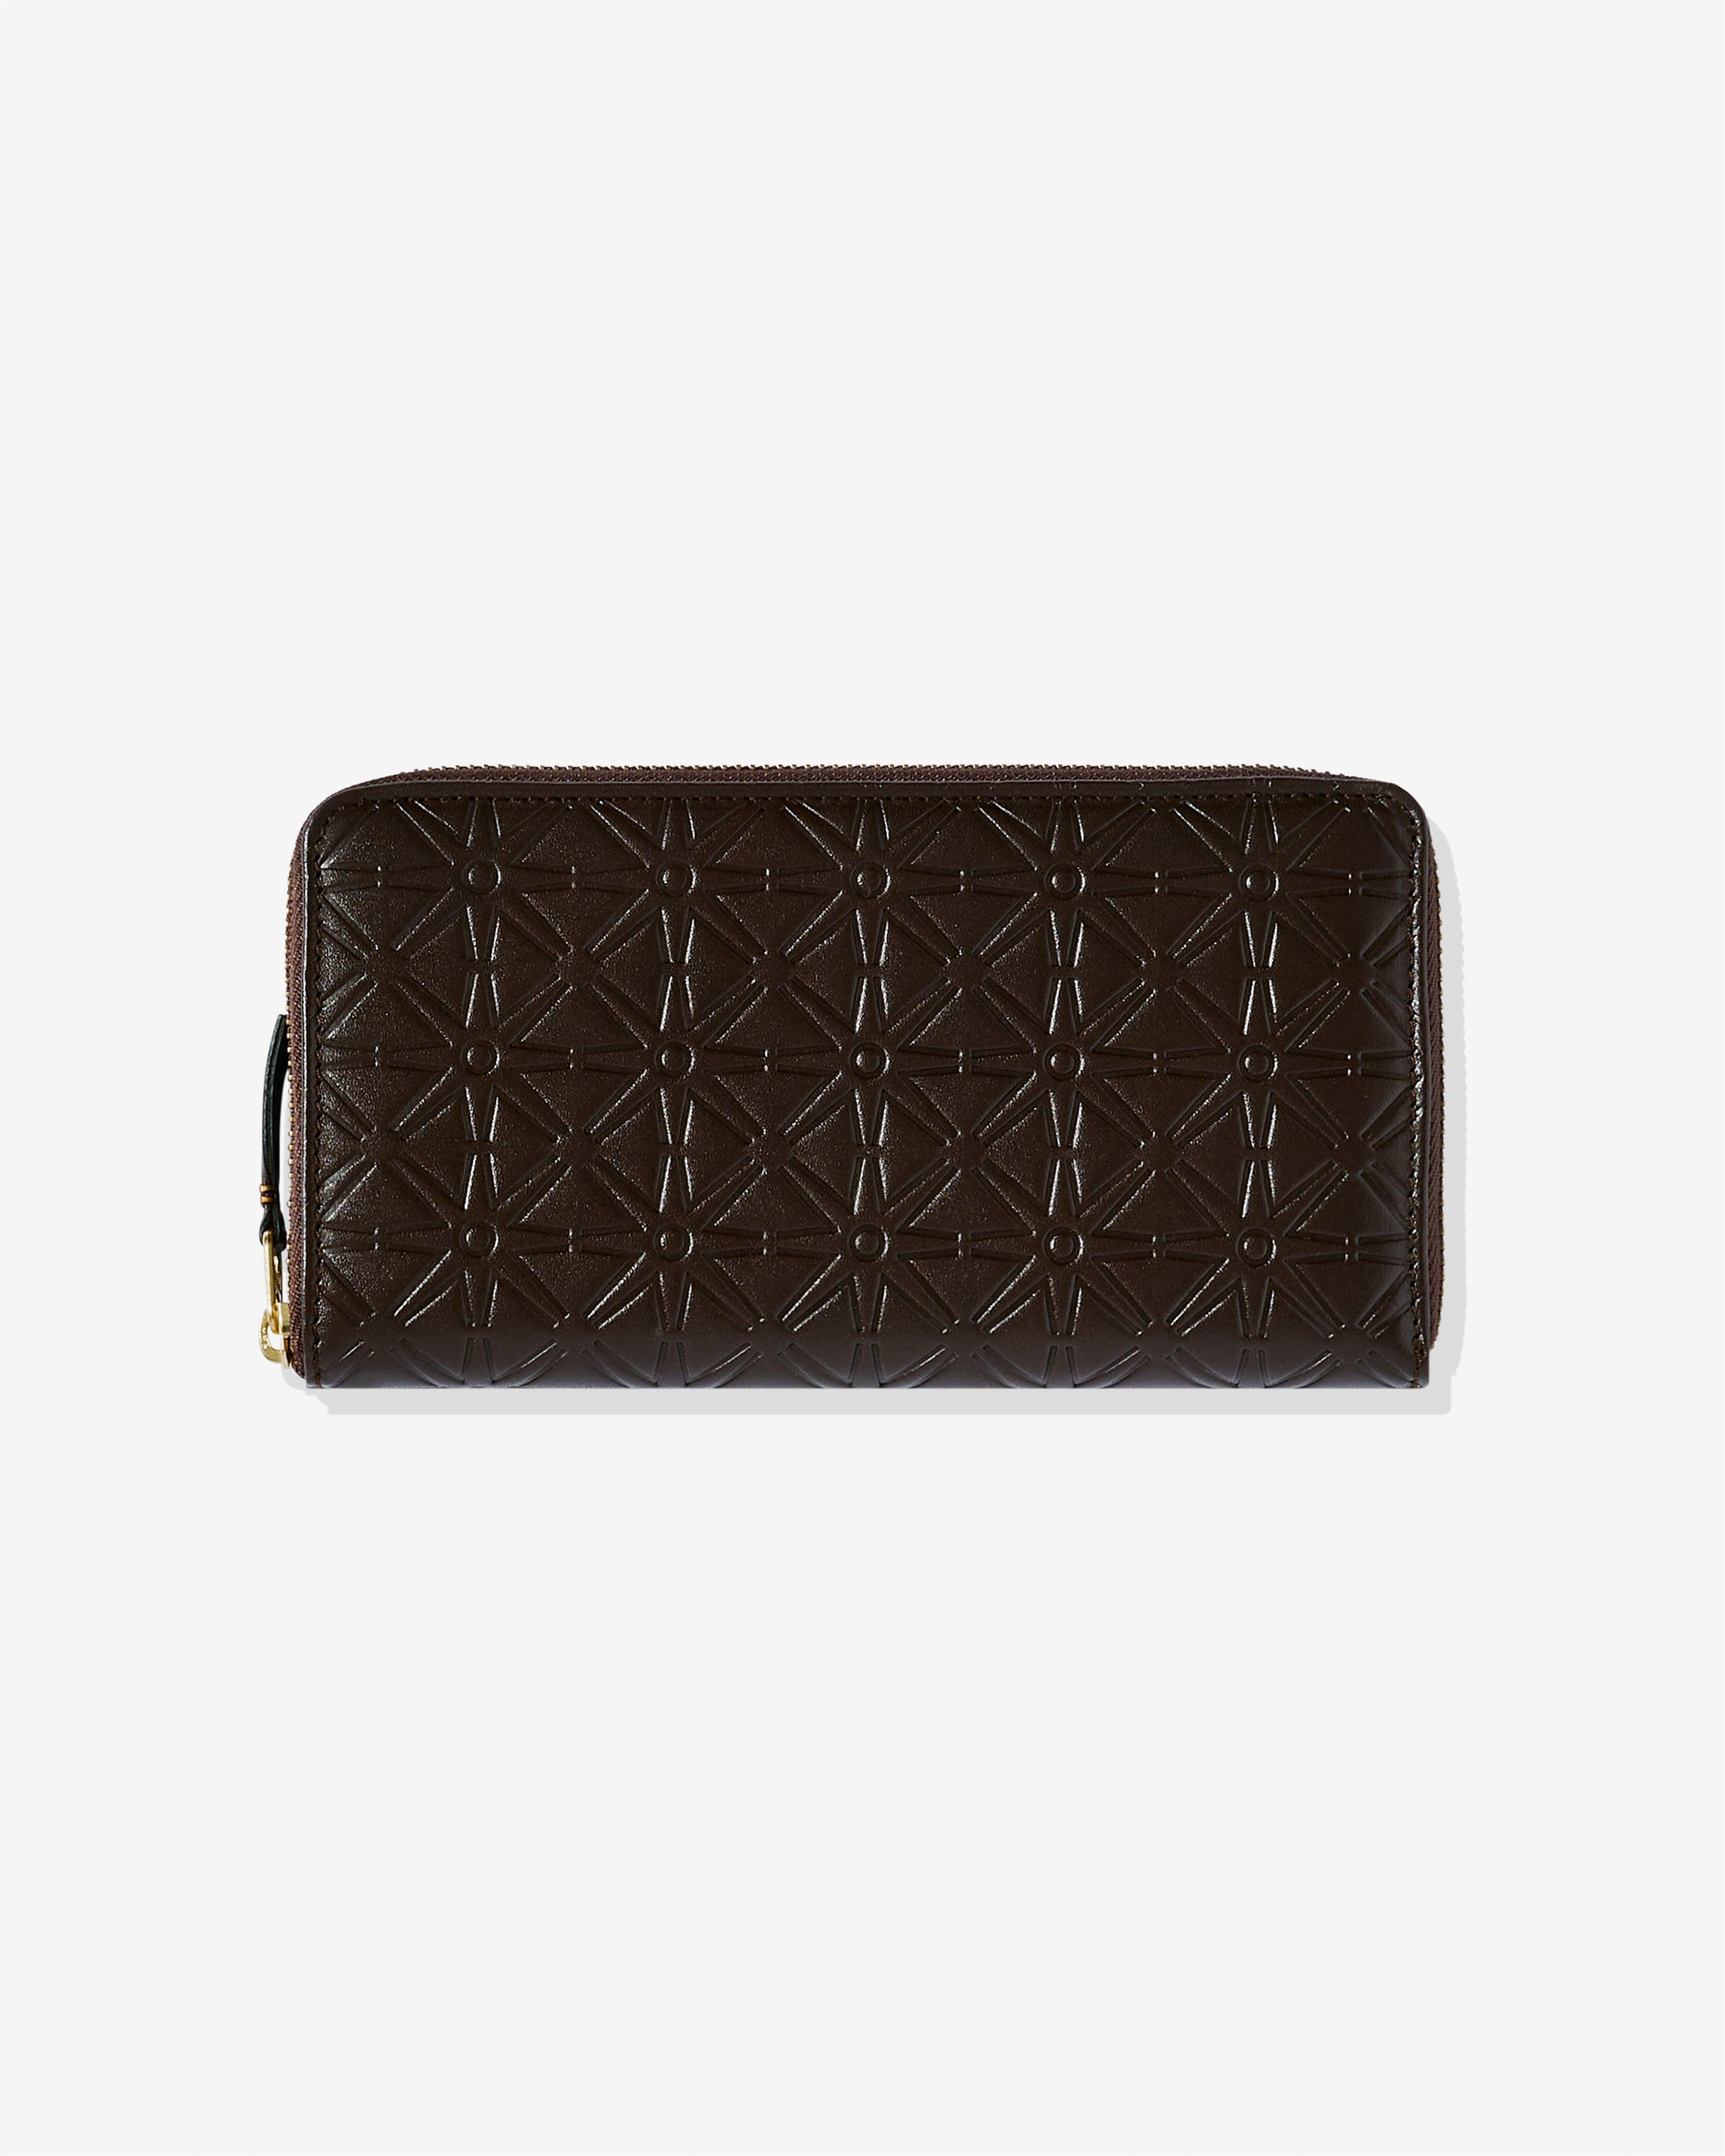 CDG Wallet - Embossed A Zip Around Wallet - (Brown SA010EA) by COMME DES GARCONS